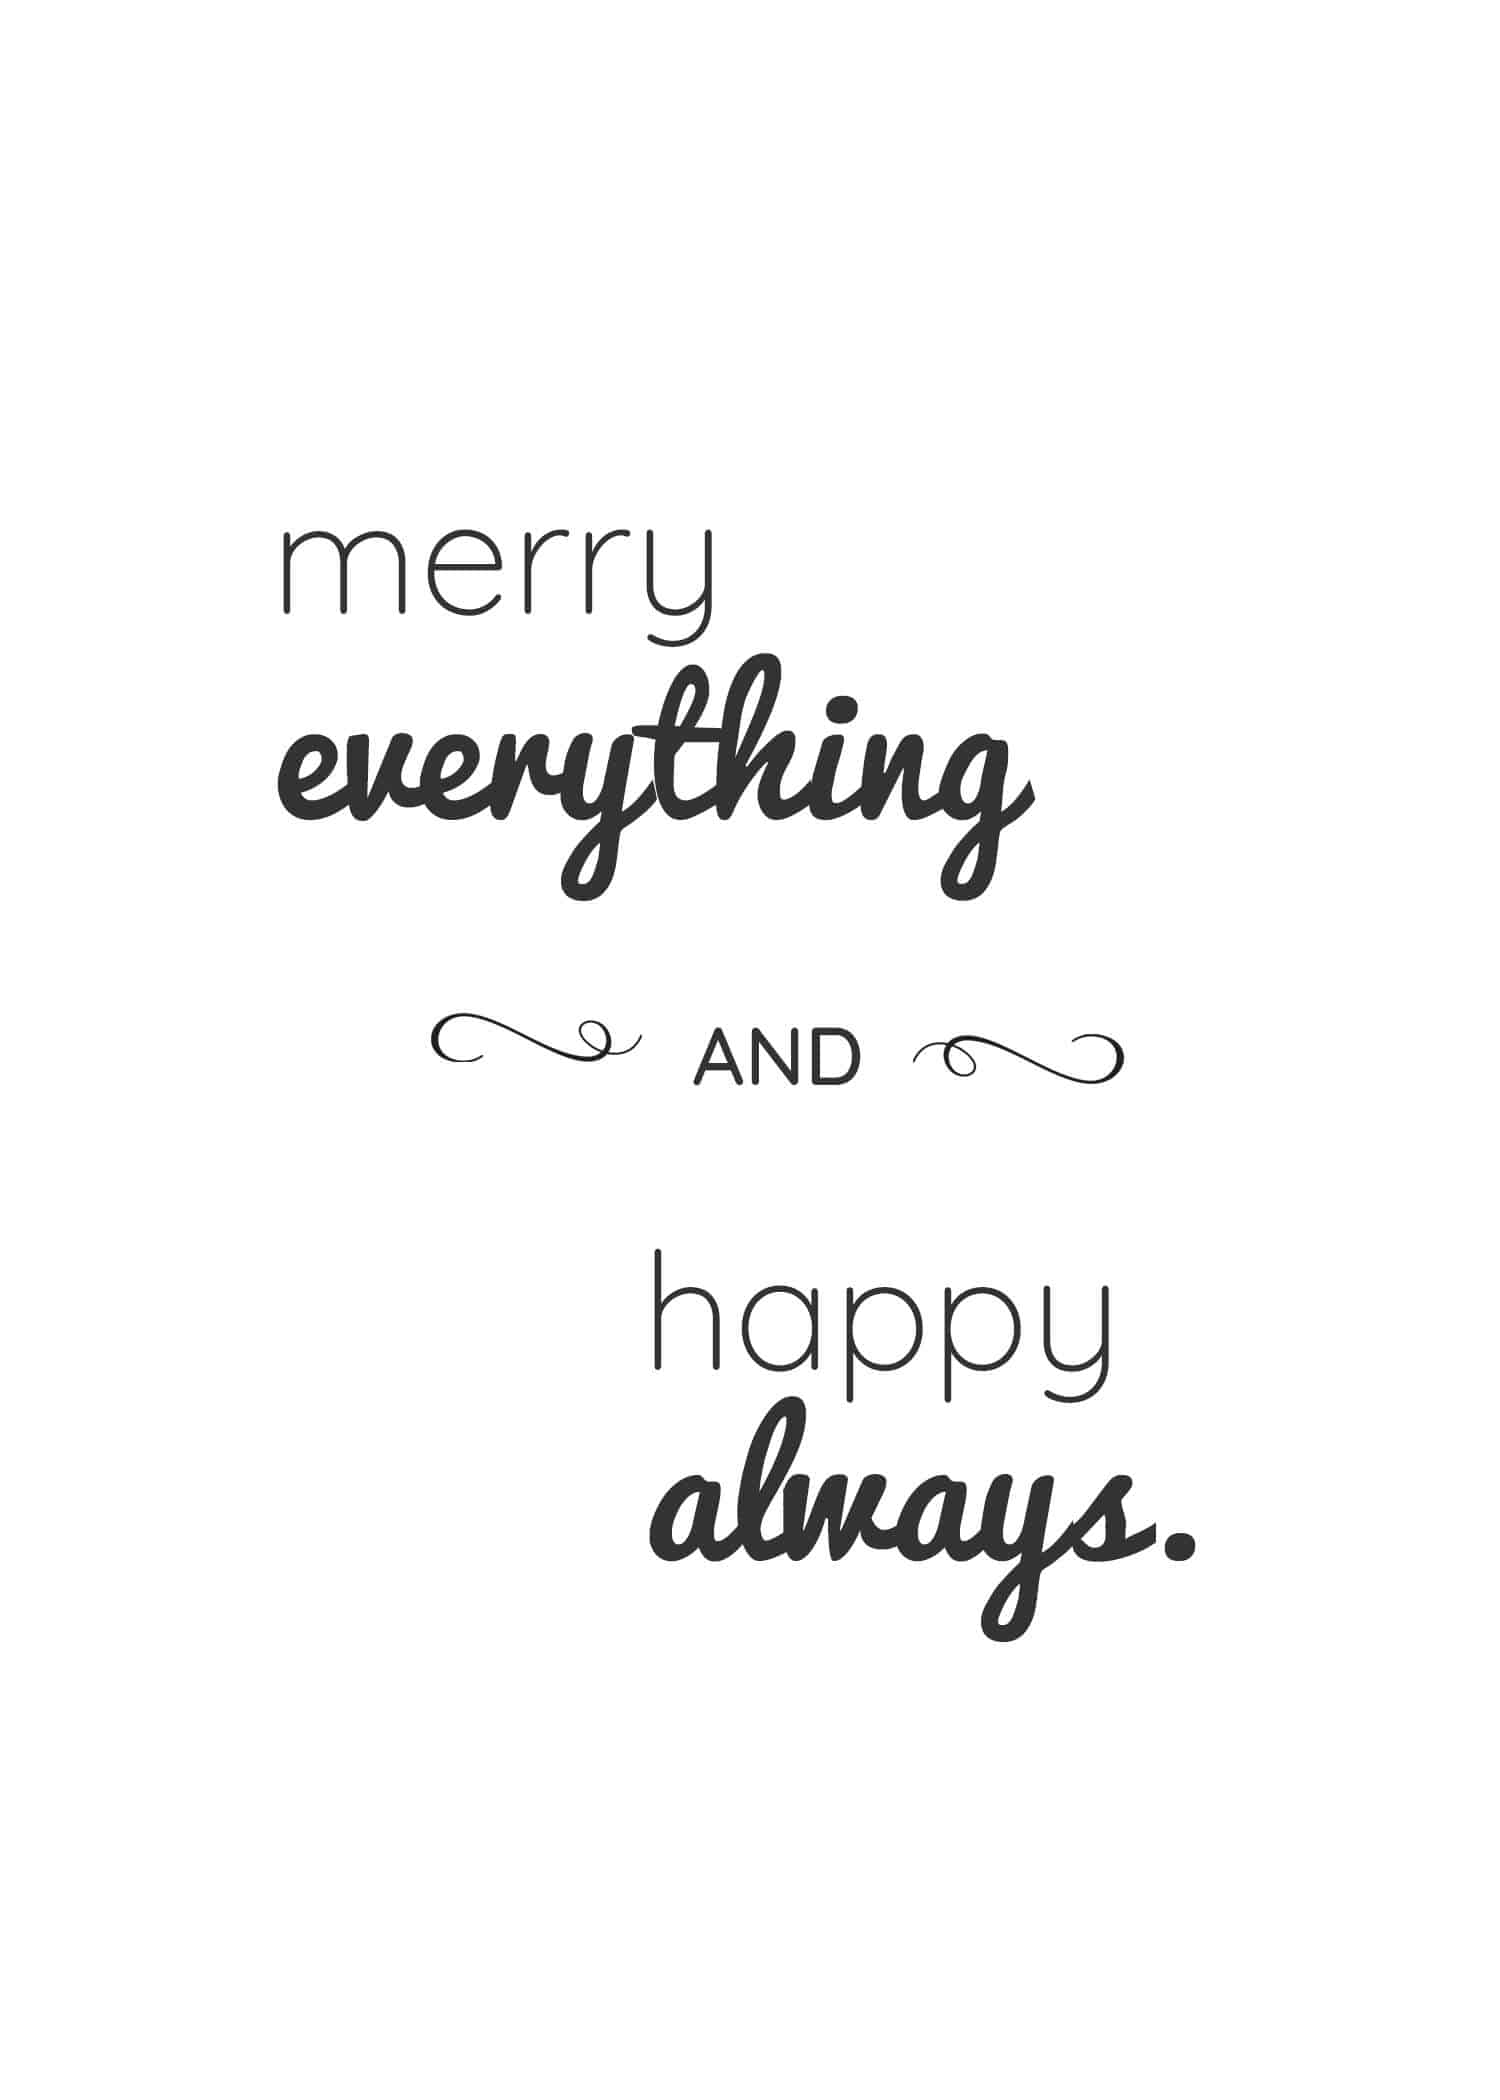 merry everything and happy always wall art